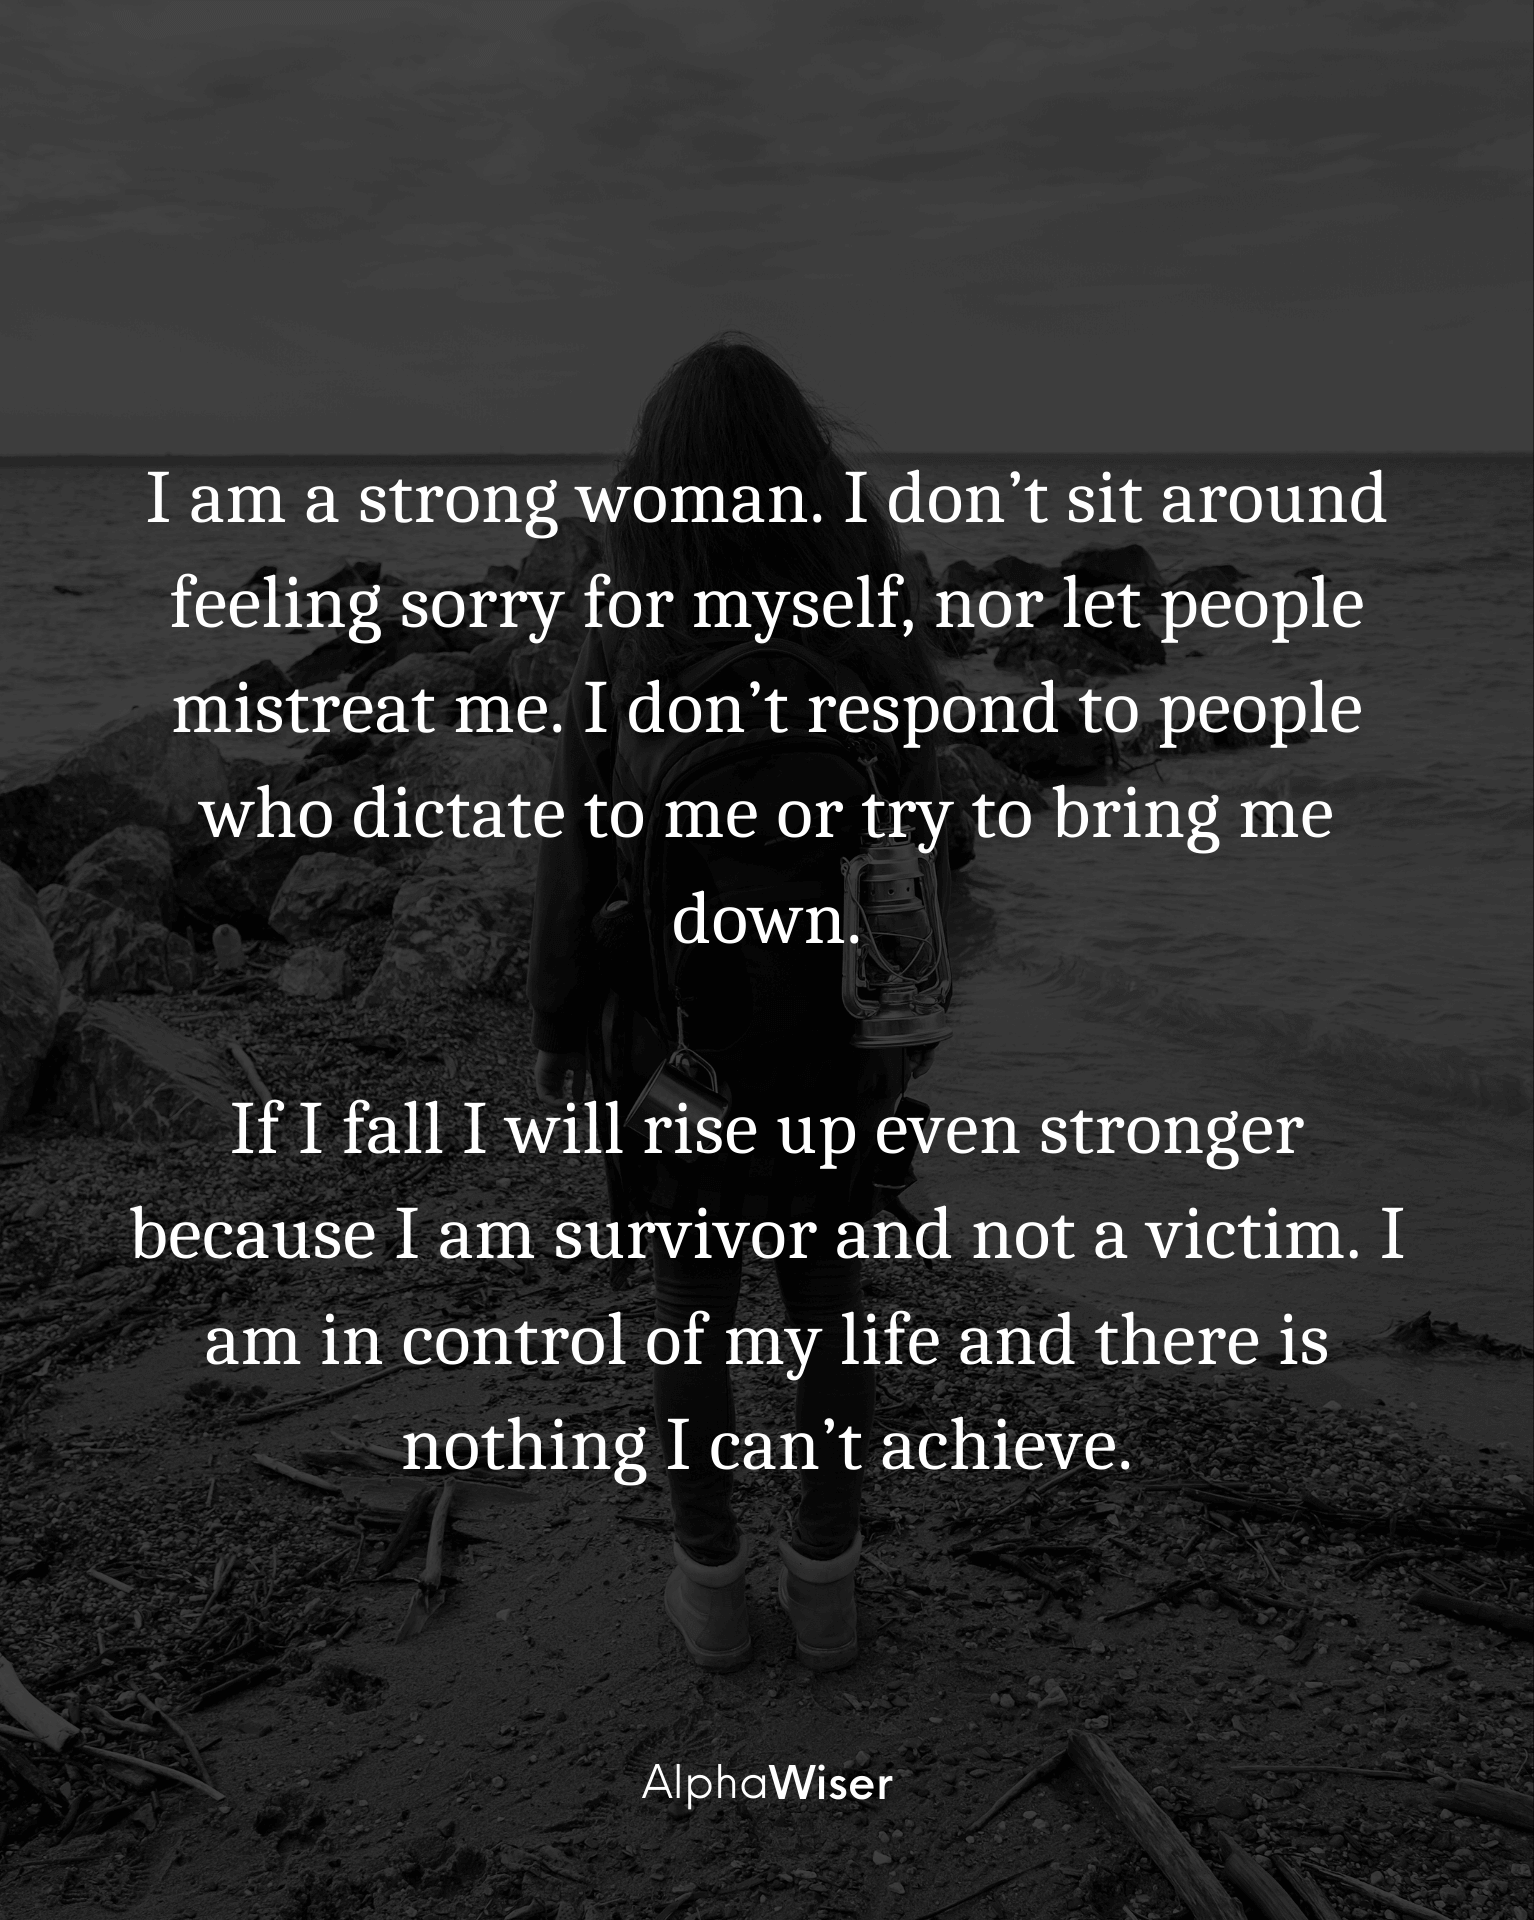 I am a strong woman. I don’t sit around feeling sorry for myself, nor let people mistreat me.